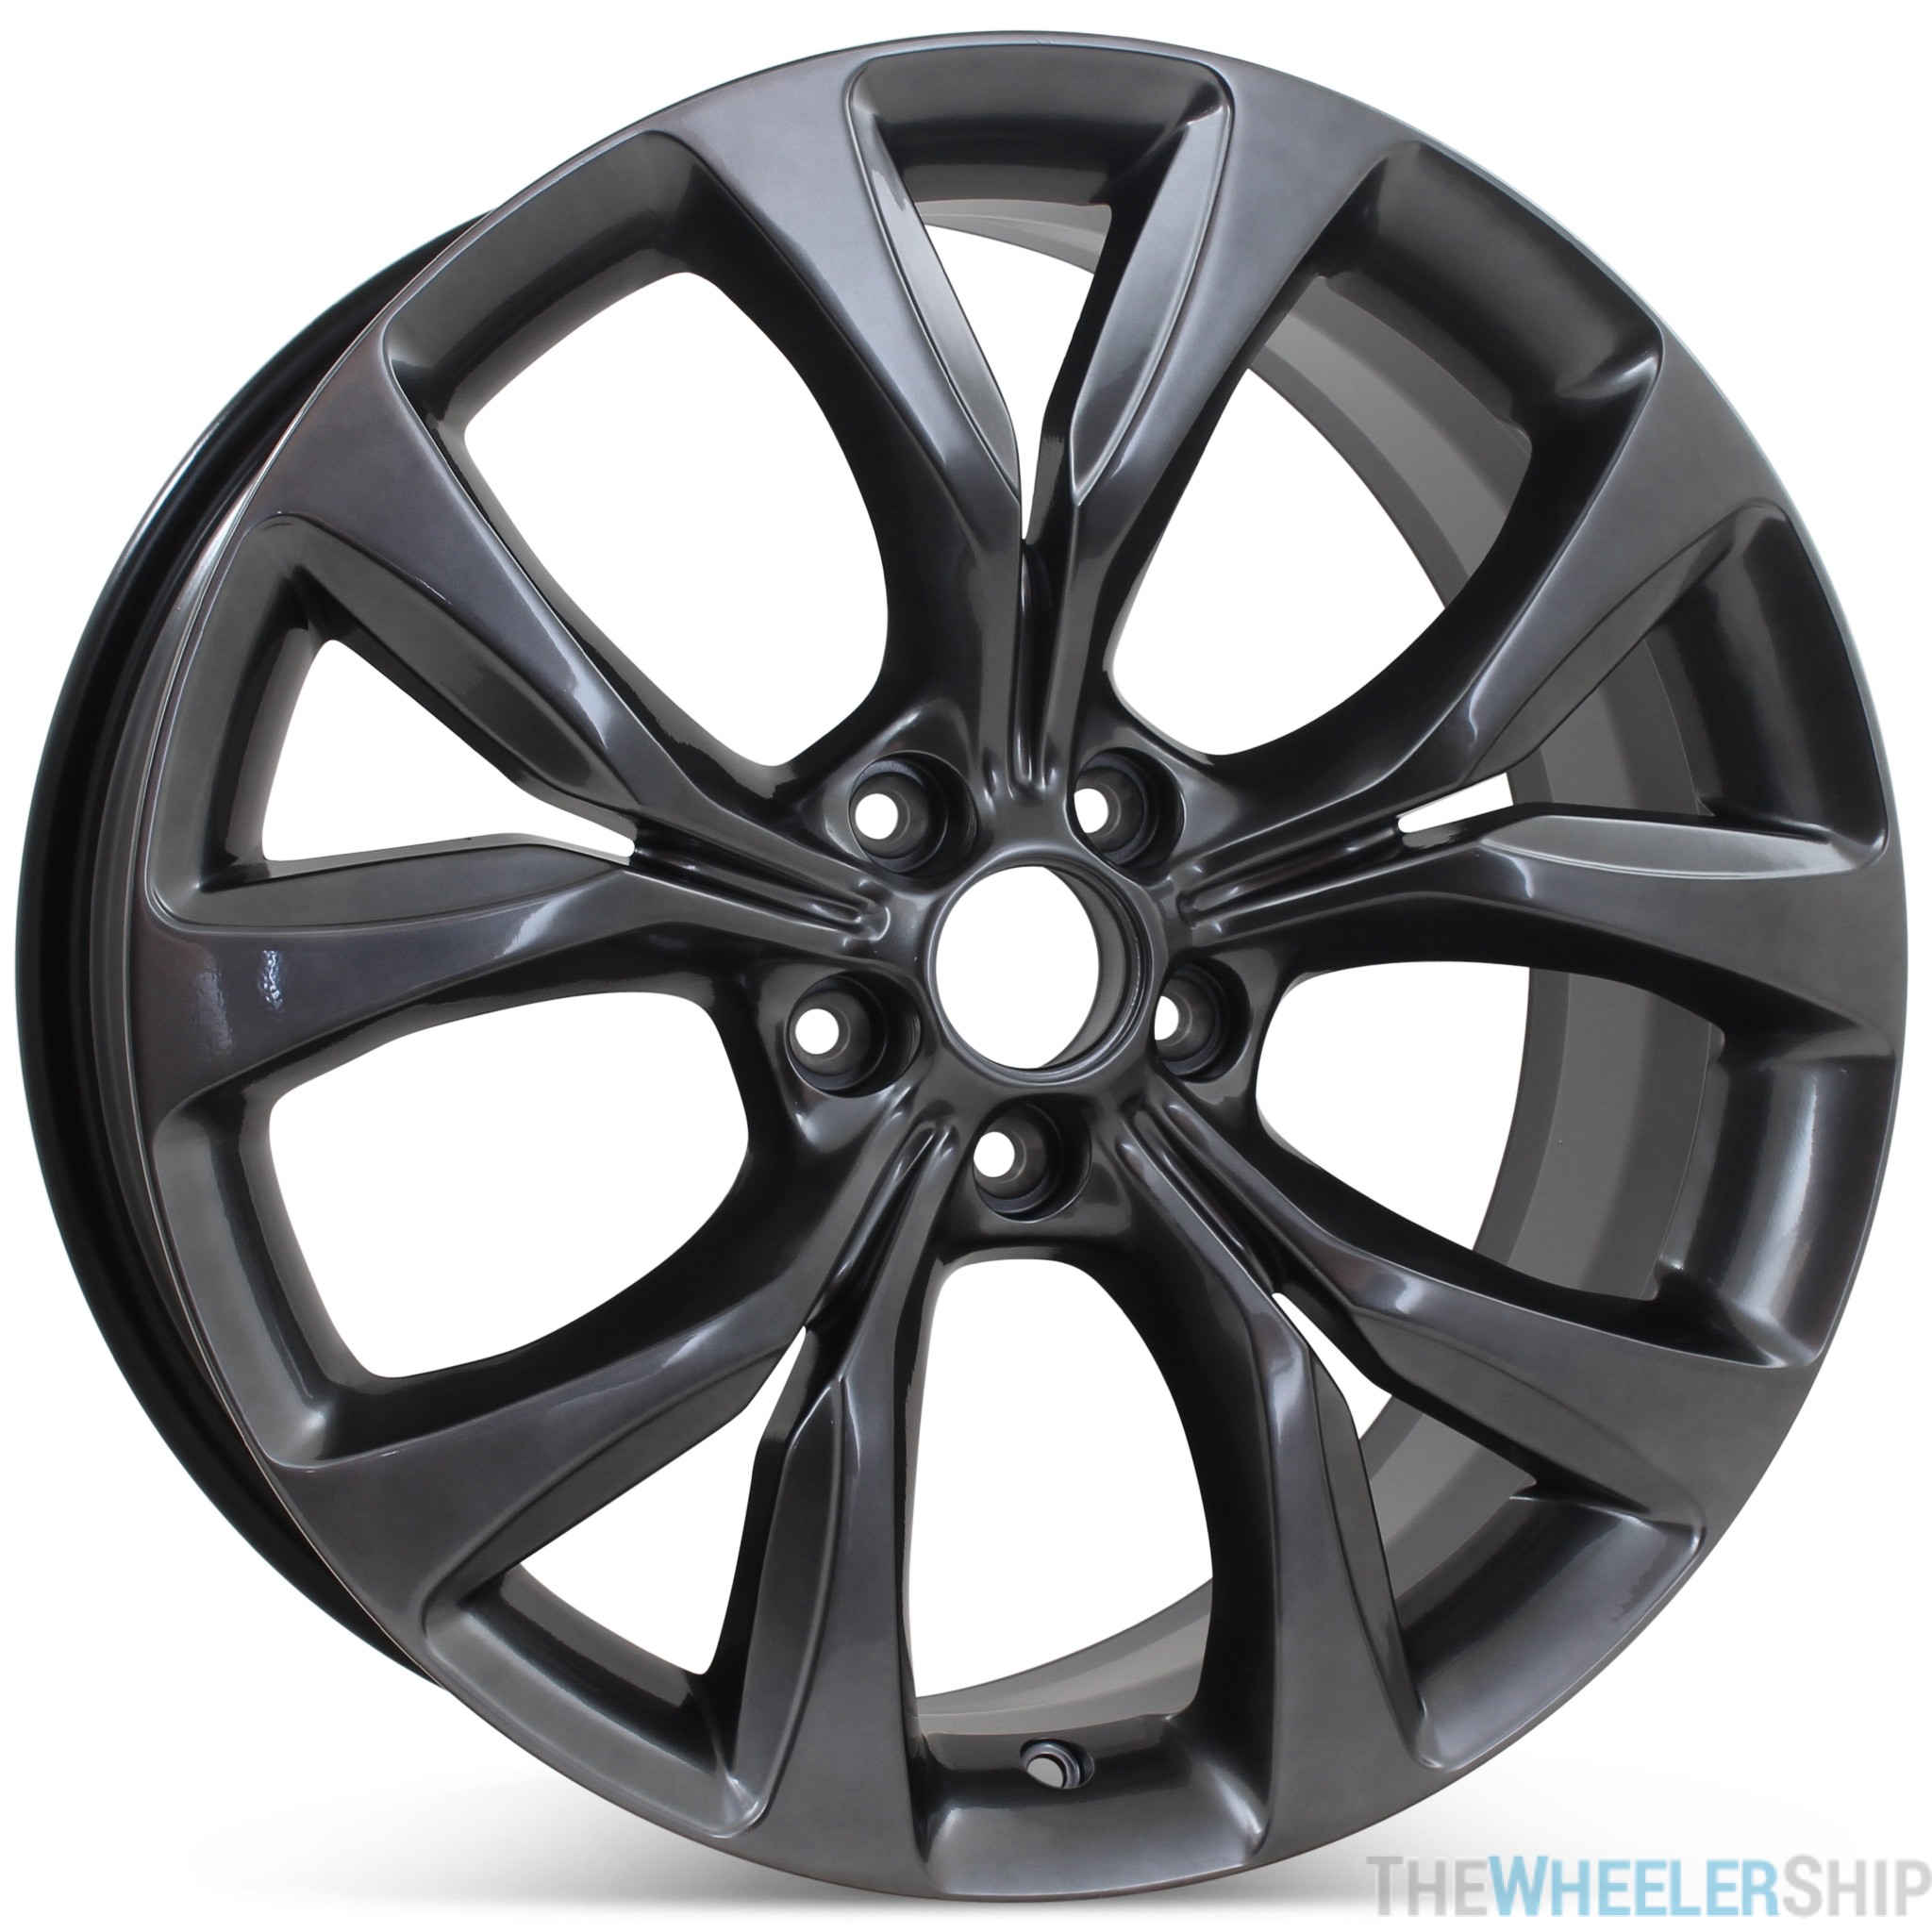 Set of 4 New 19" x 8" Alloy Replacement Wheel for Chrysler 200 2015